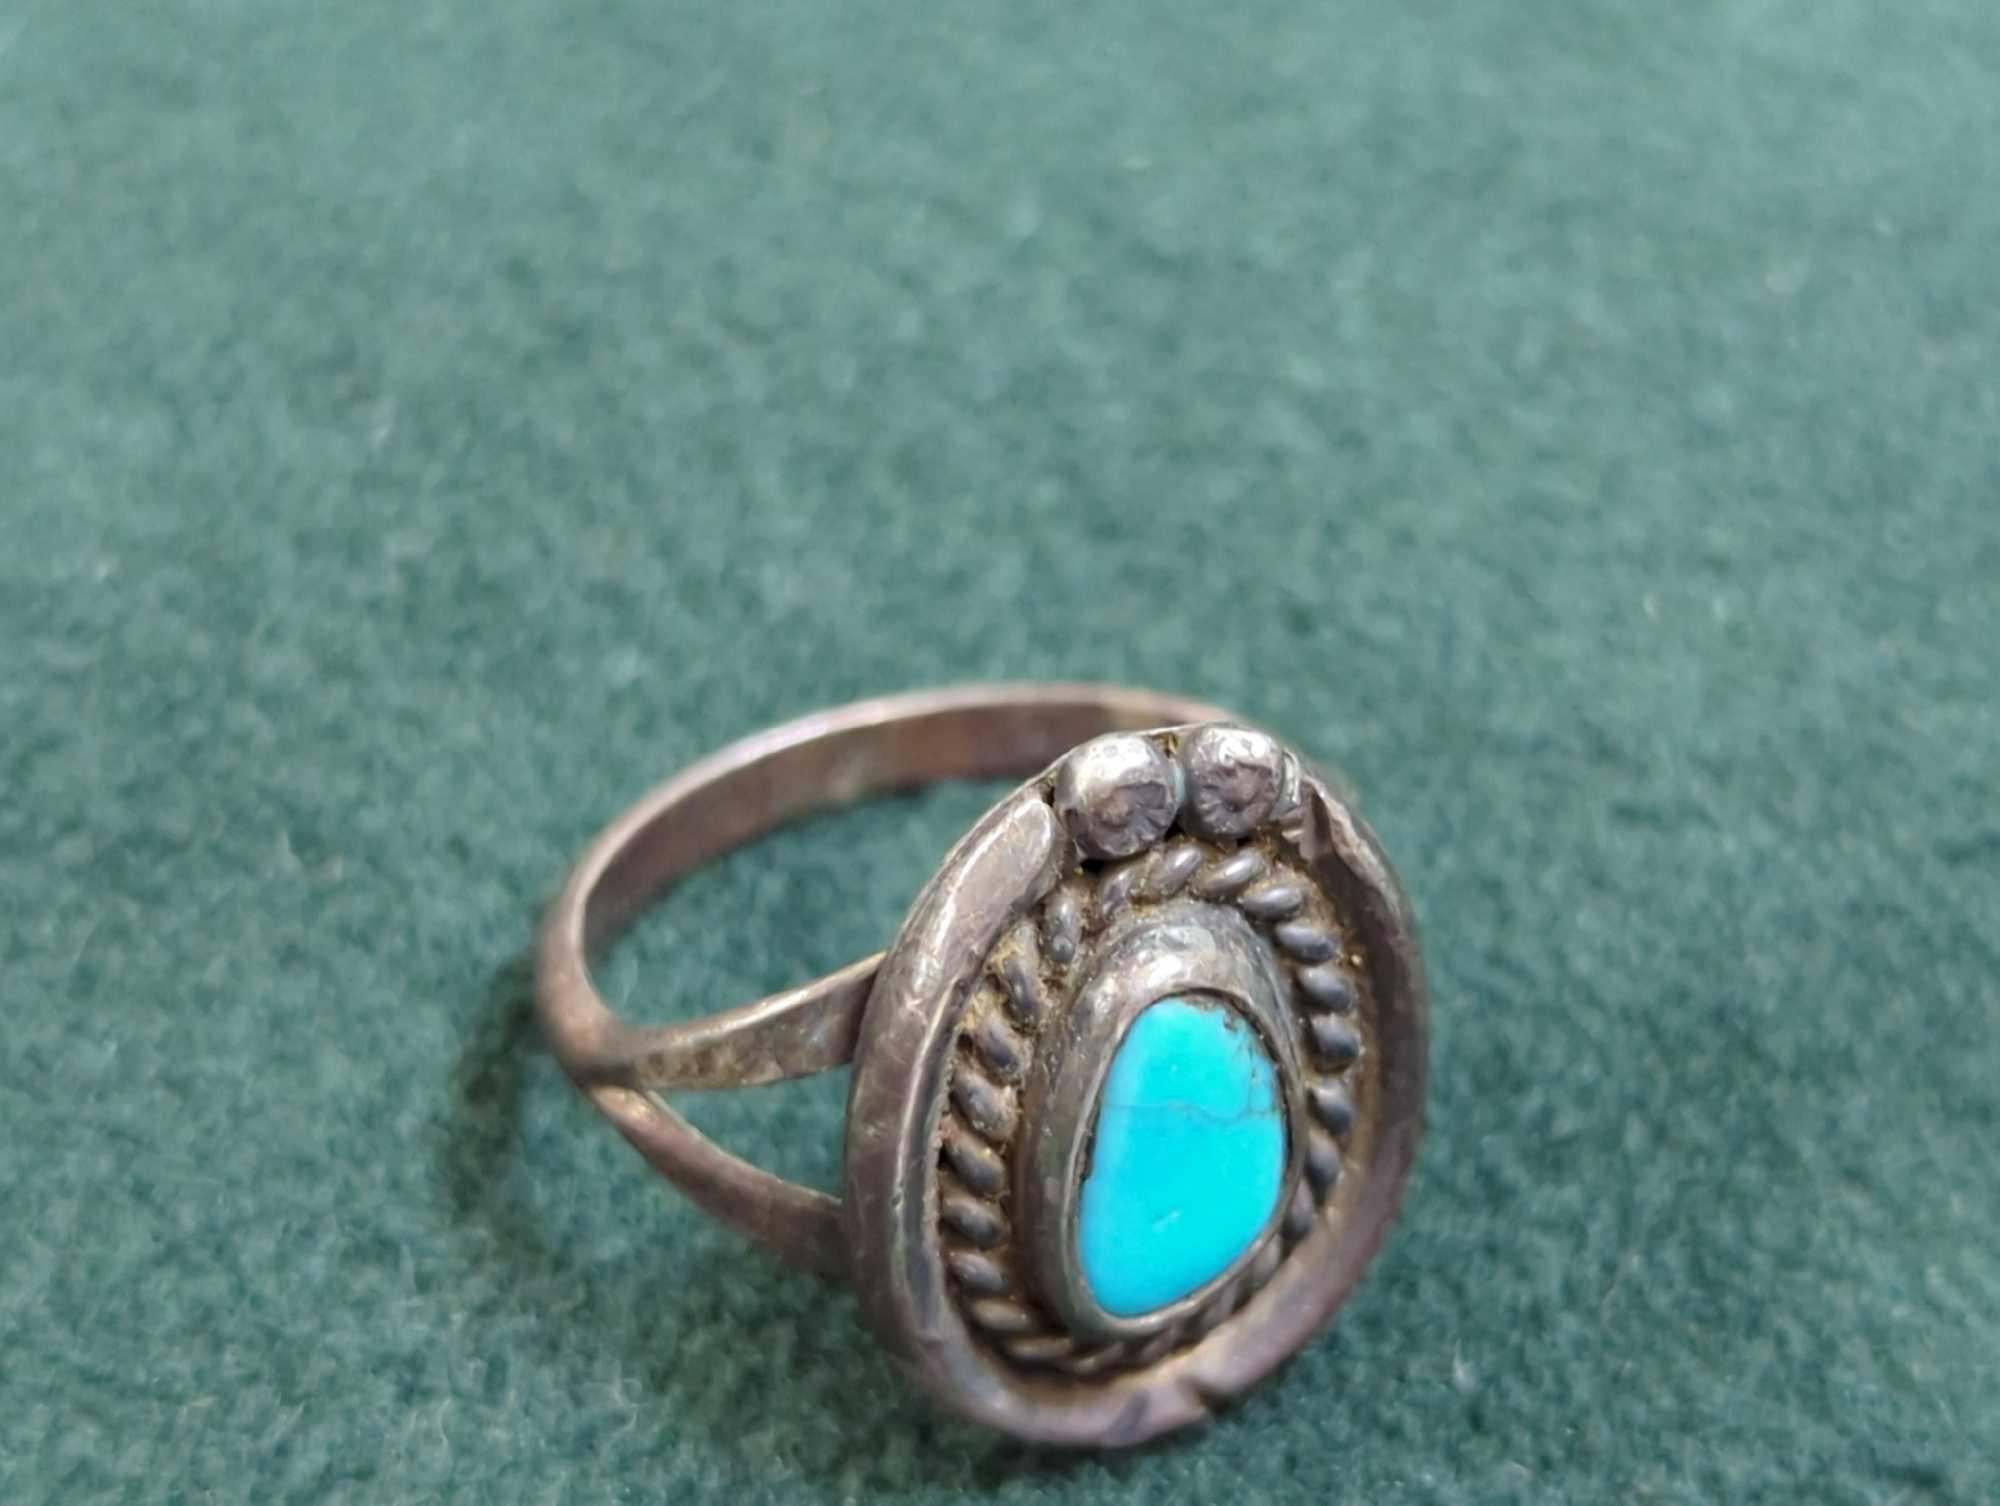 SOME STERLING RINGS IN RING CASE SOME MISSING STONES 40.4g INCLUDING STONE